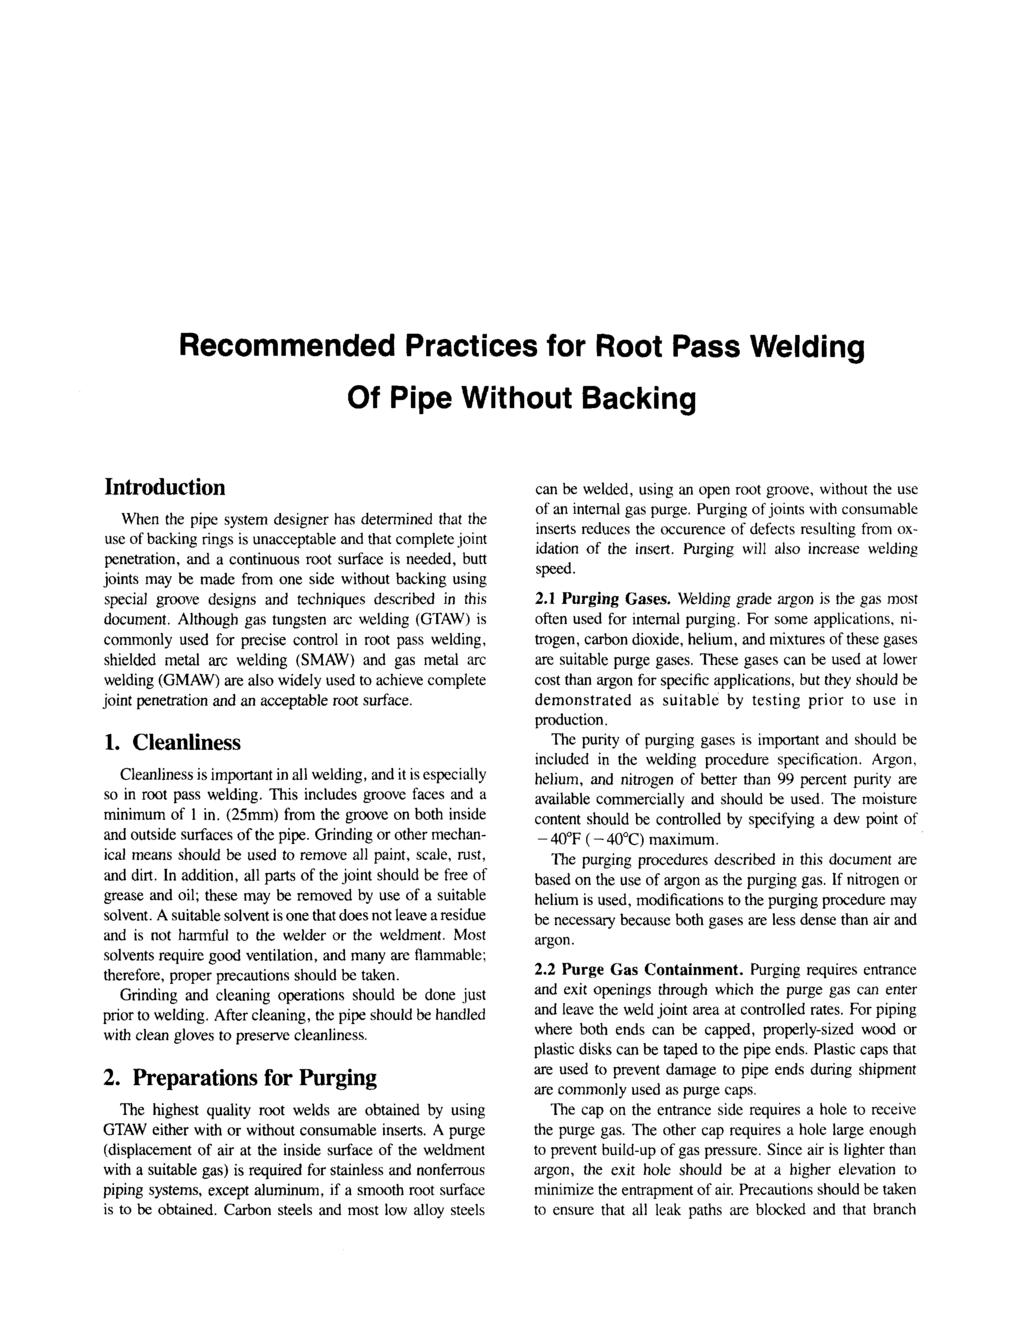 Recommended Practices for Root Pass Welding Of Pipe Without Backing Introduction When the pipe system designer has determined that the use of backing rings is unacceptable and that complete joint